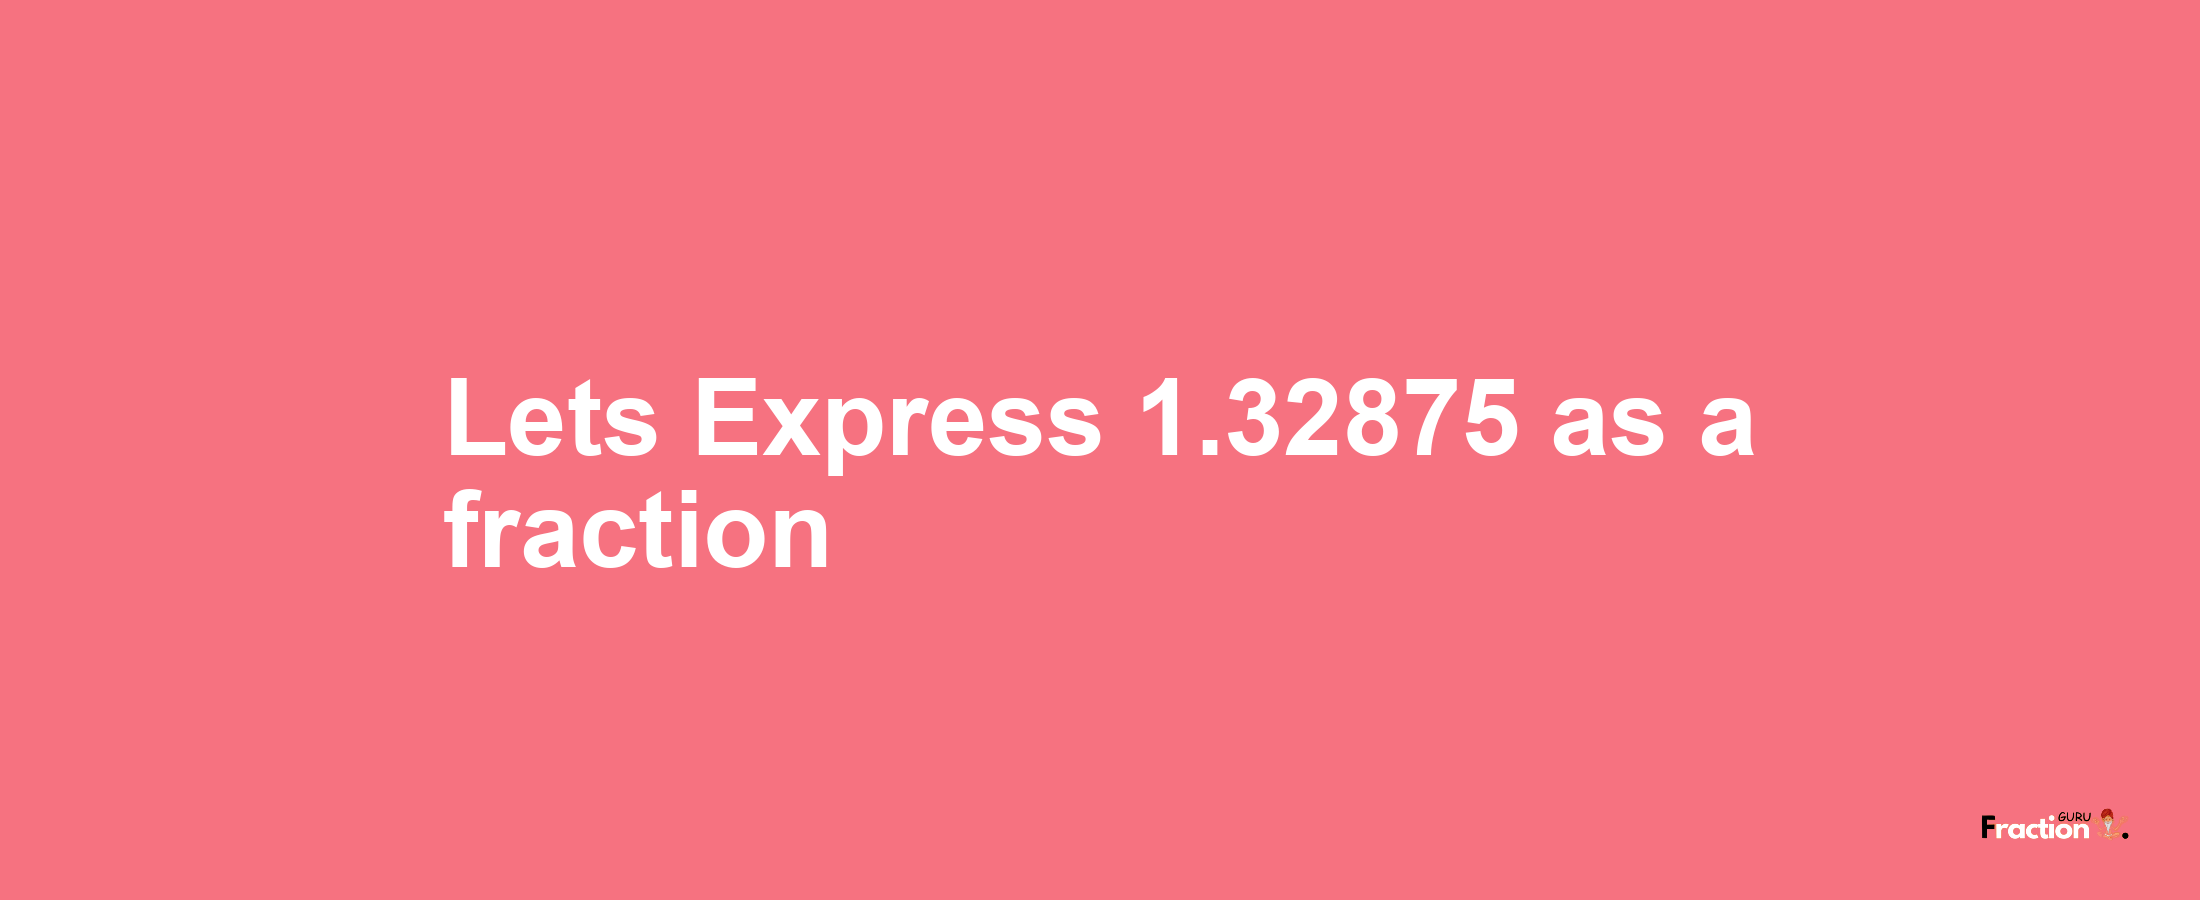 Lets Express 1.32875 as afraction